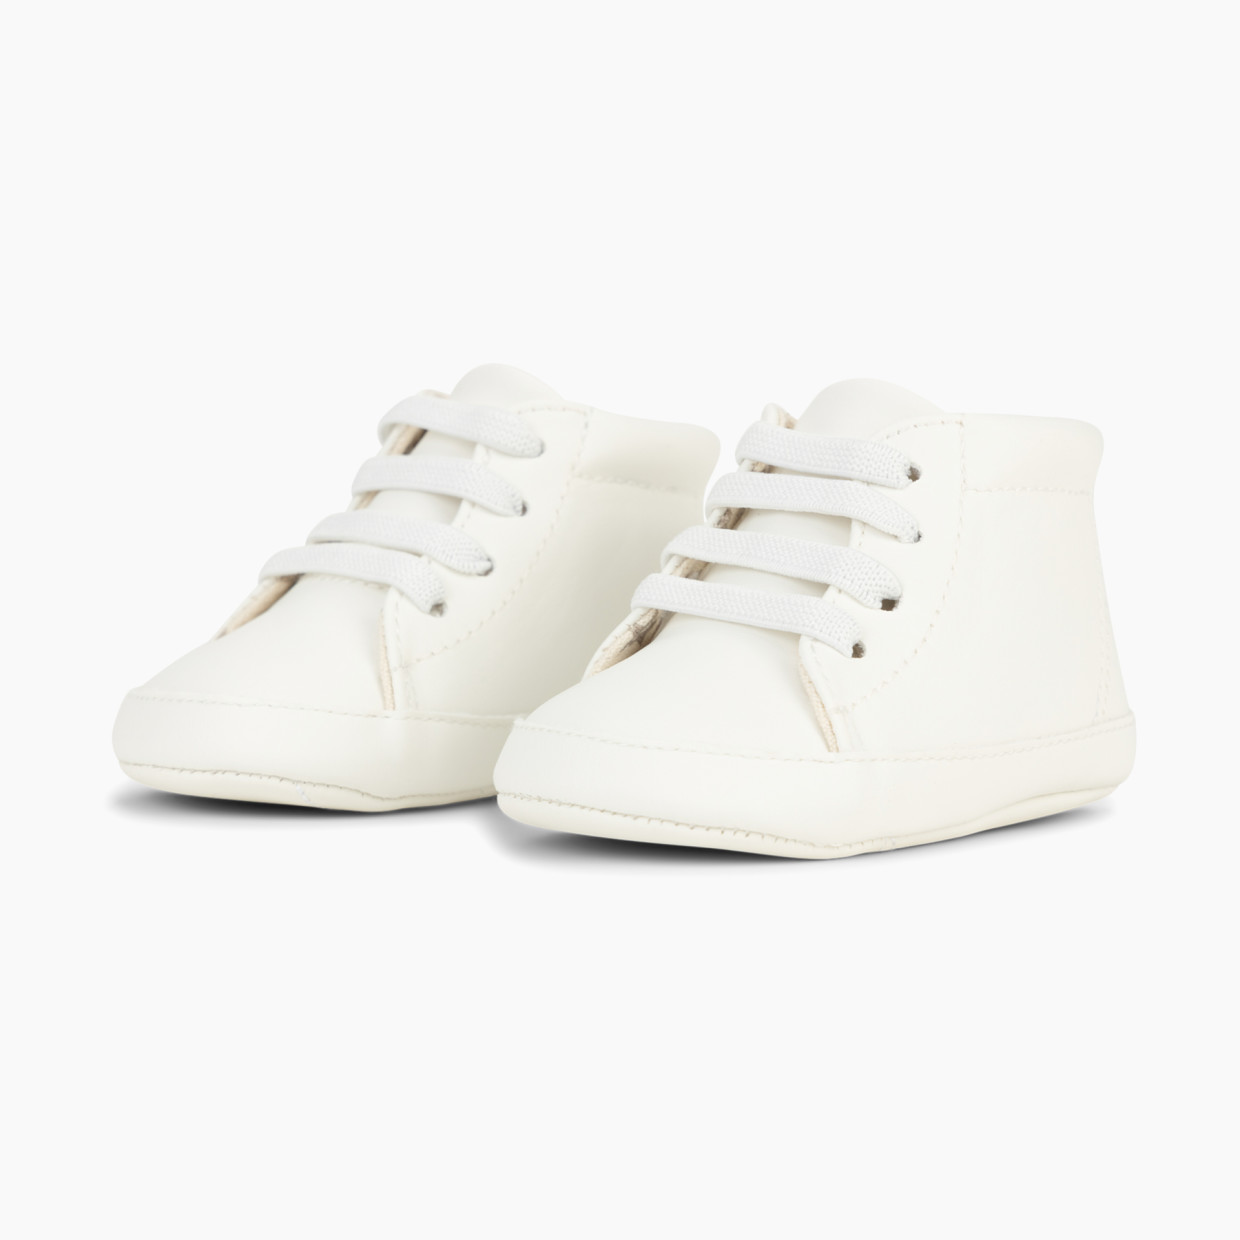 JUJUBE Eco Step Sneaker Shoes - Snowy White, 3-6.